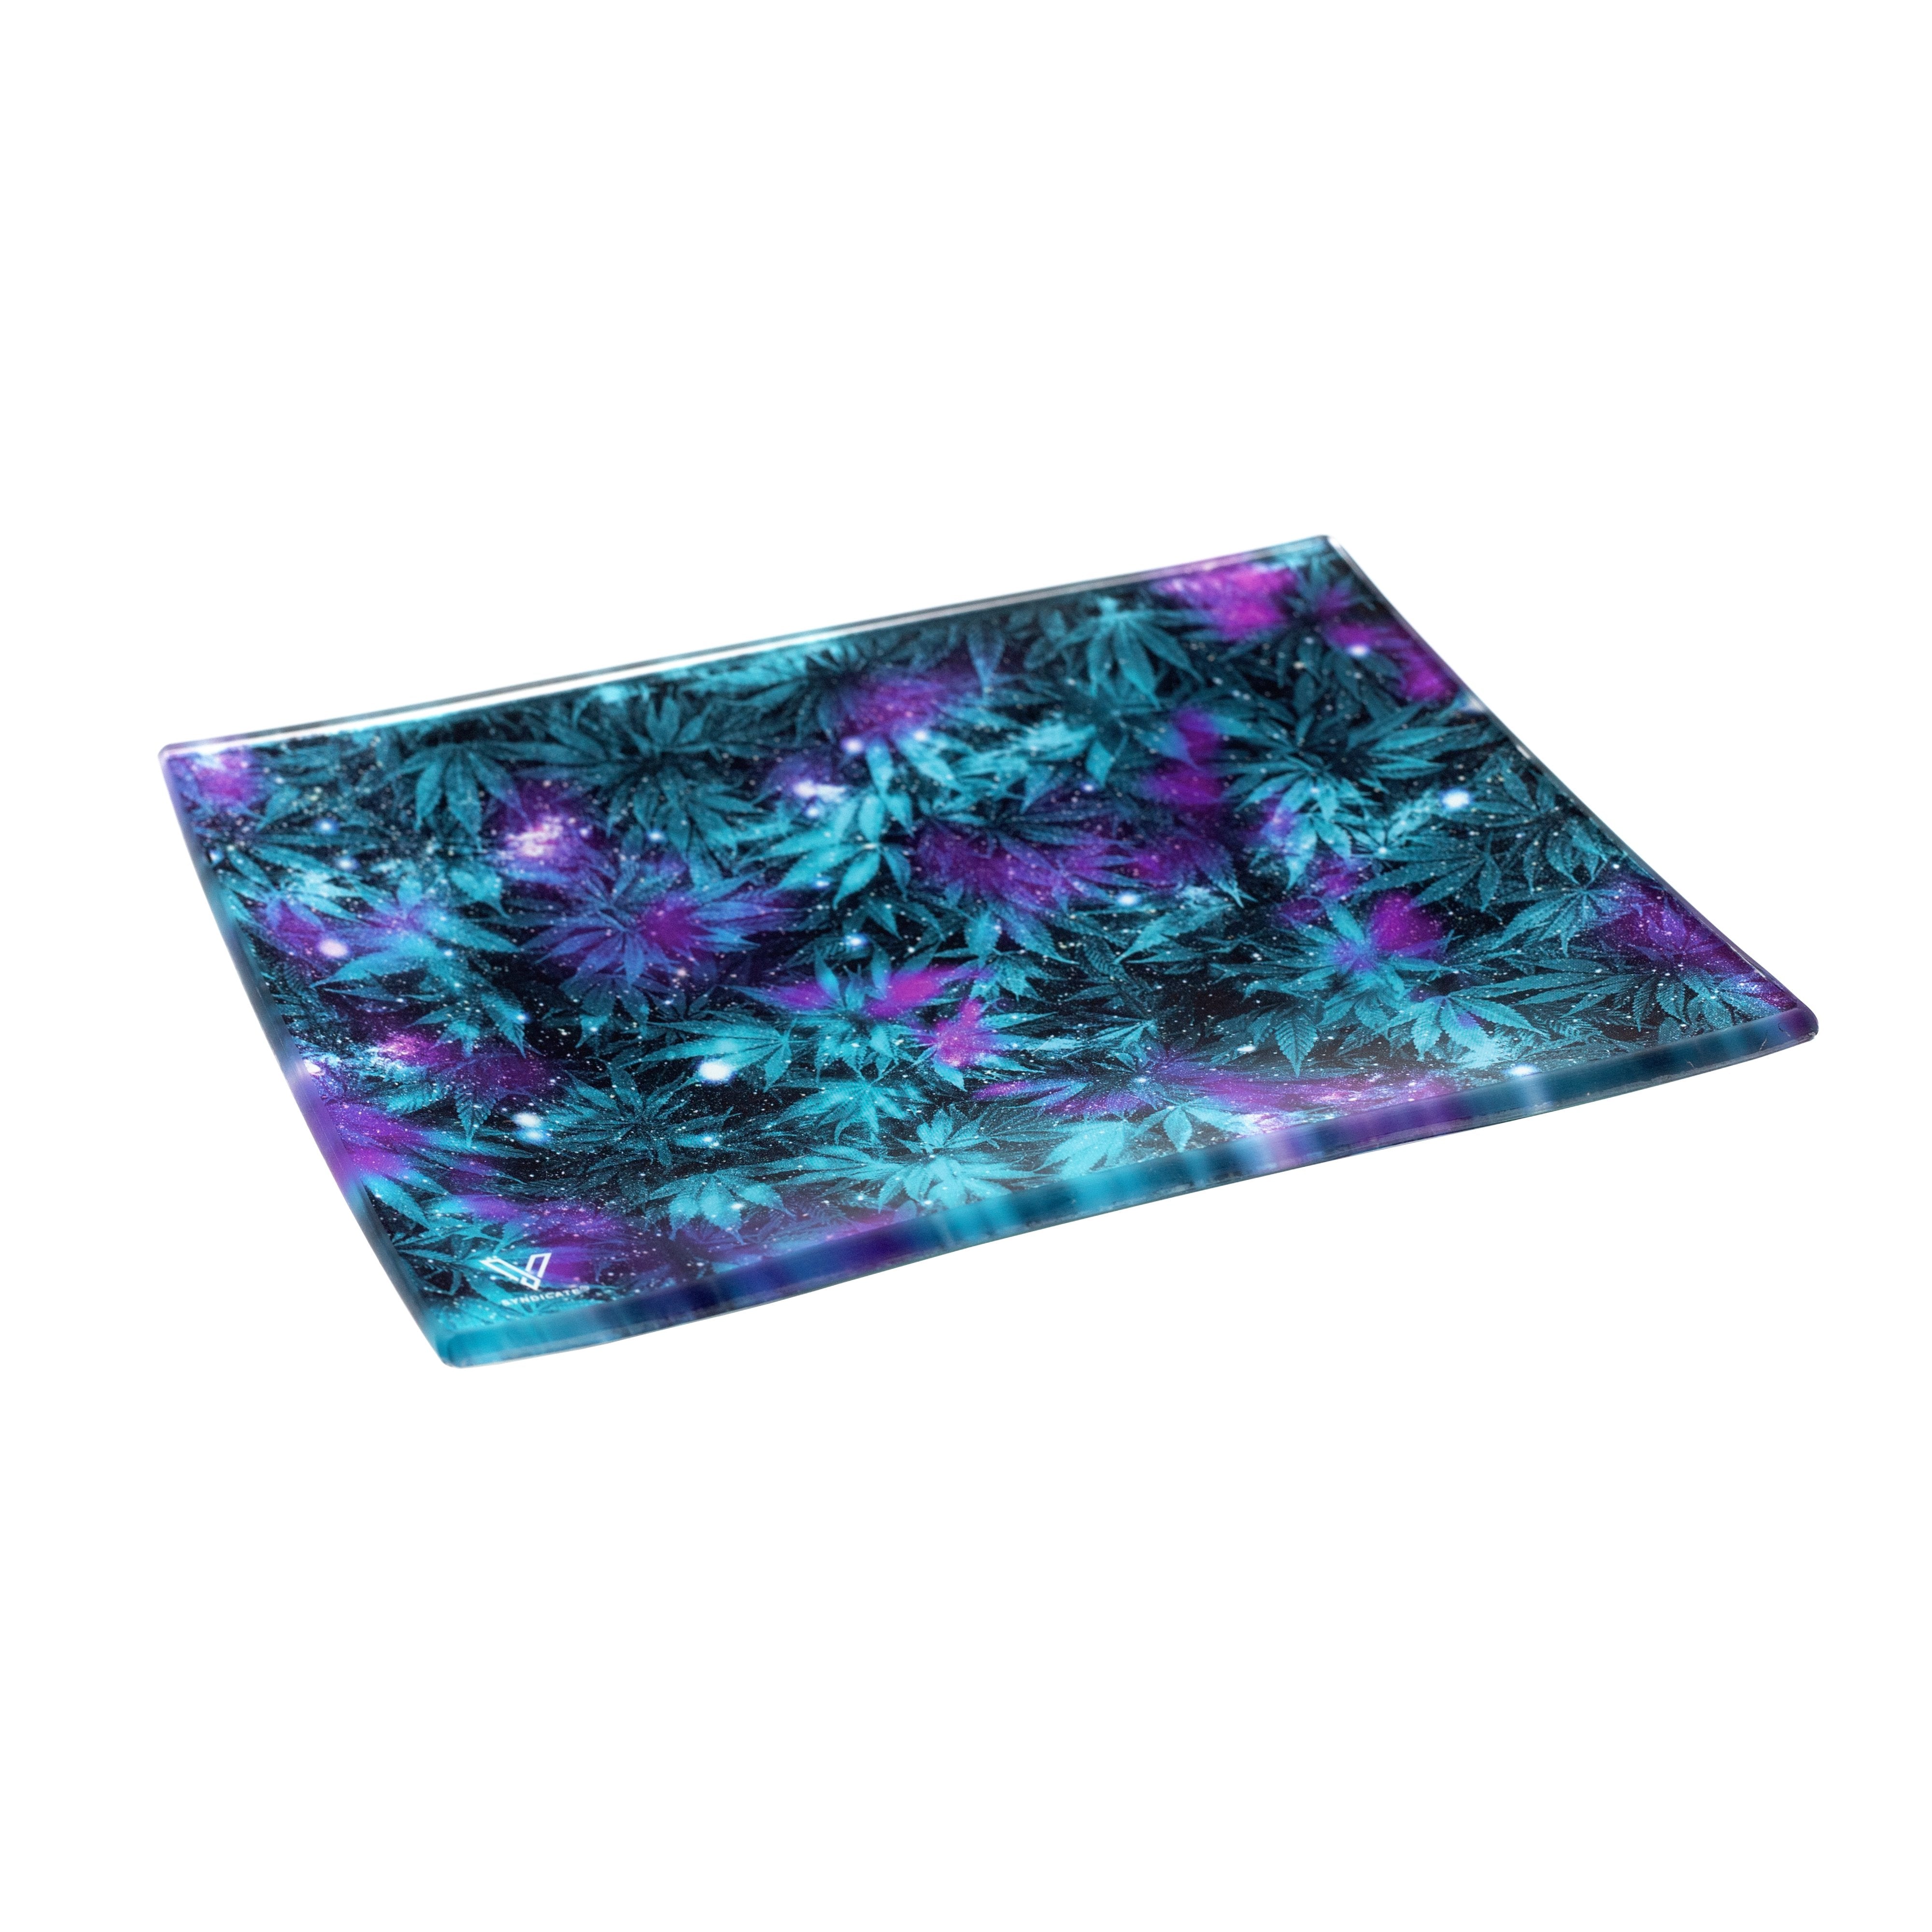 V-SYNDICATE | Cosmic Chronic Small Glass Rolling Tray | 6.5in x 5in - Small - Glass - 2